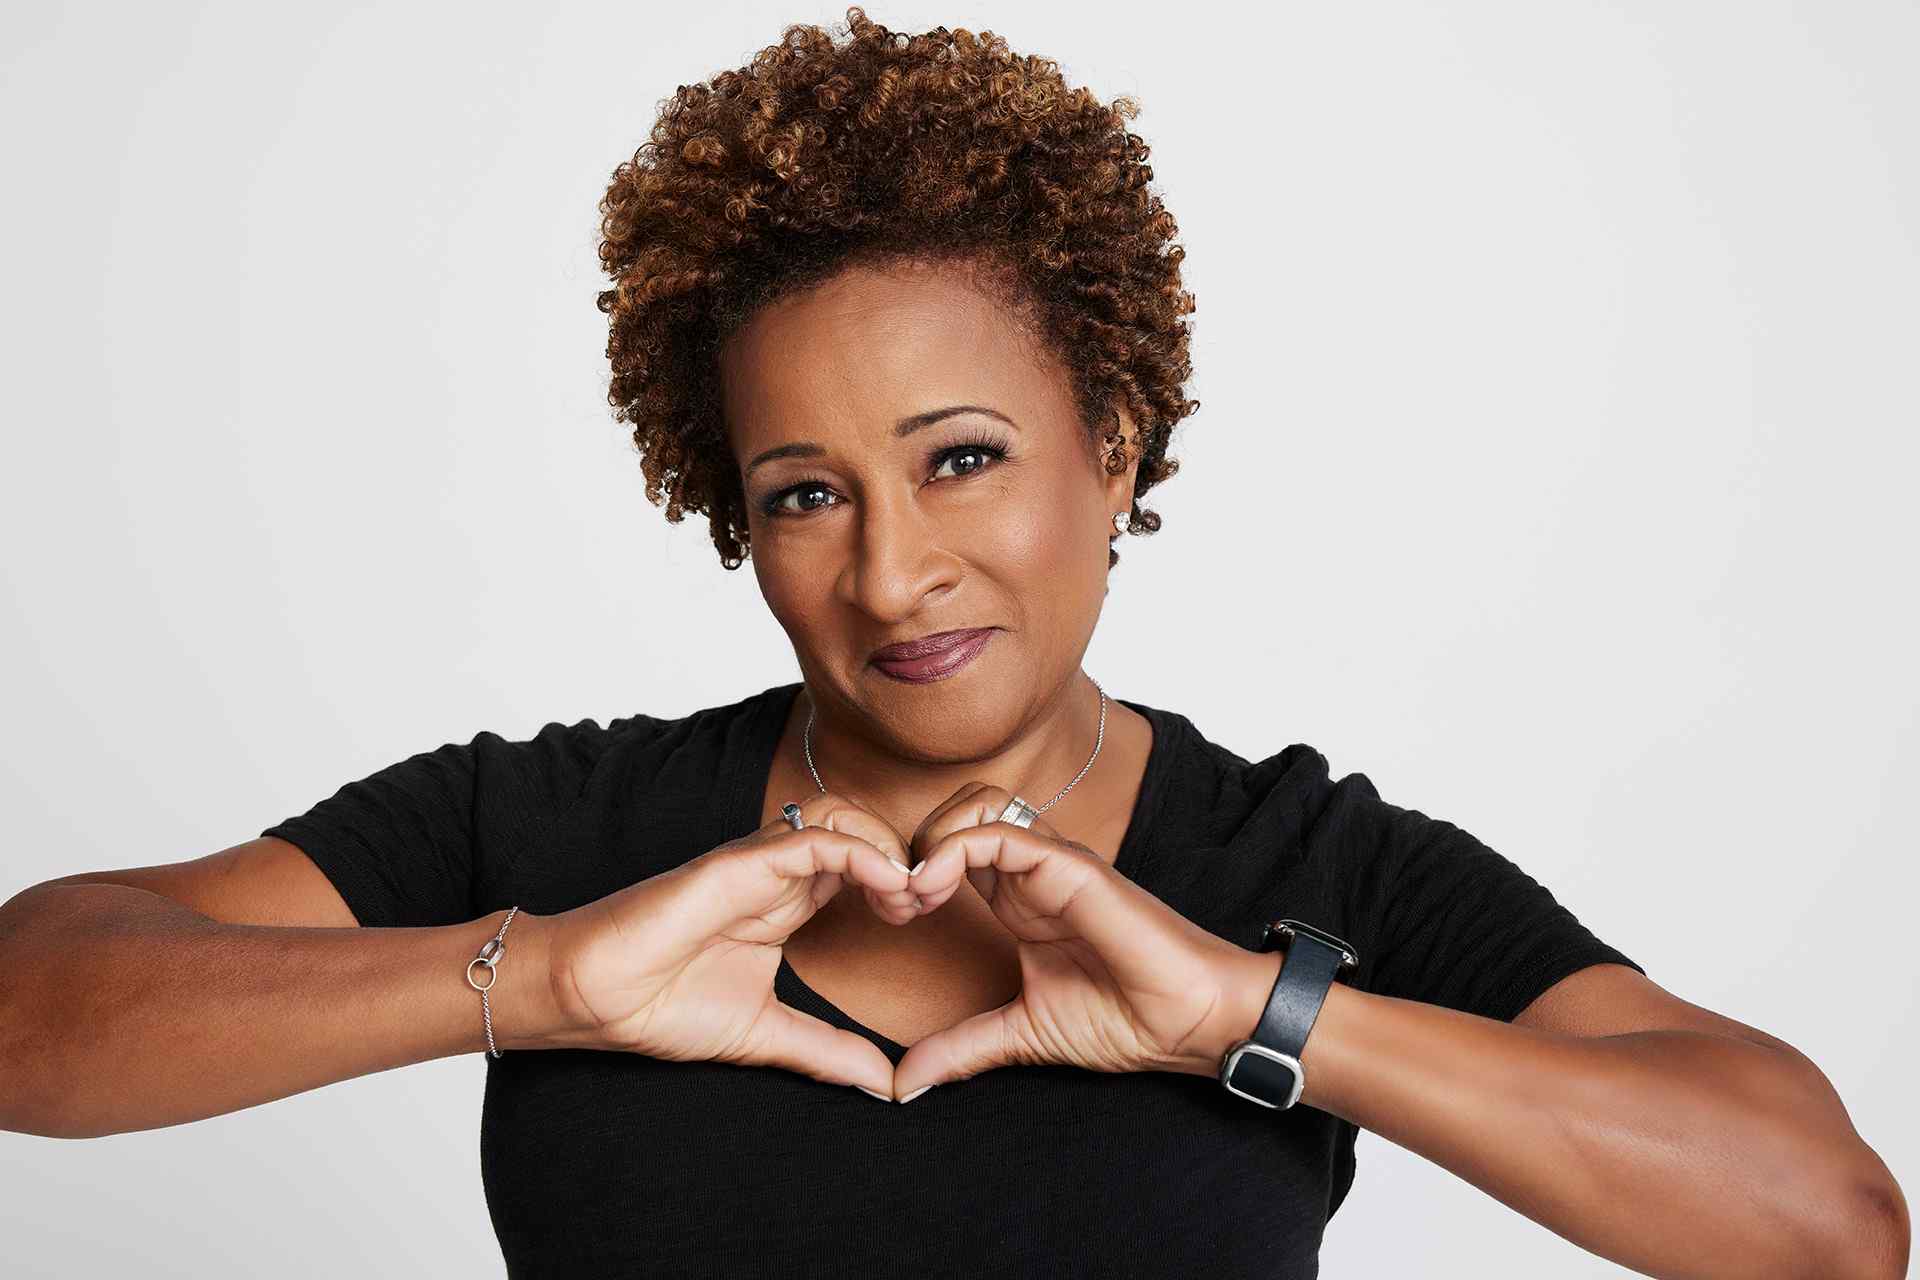 Official Website of Comedian and Television Personality Wanda Sykes